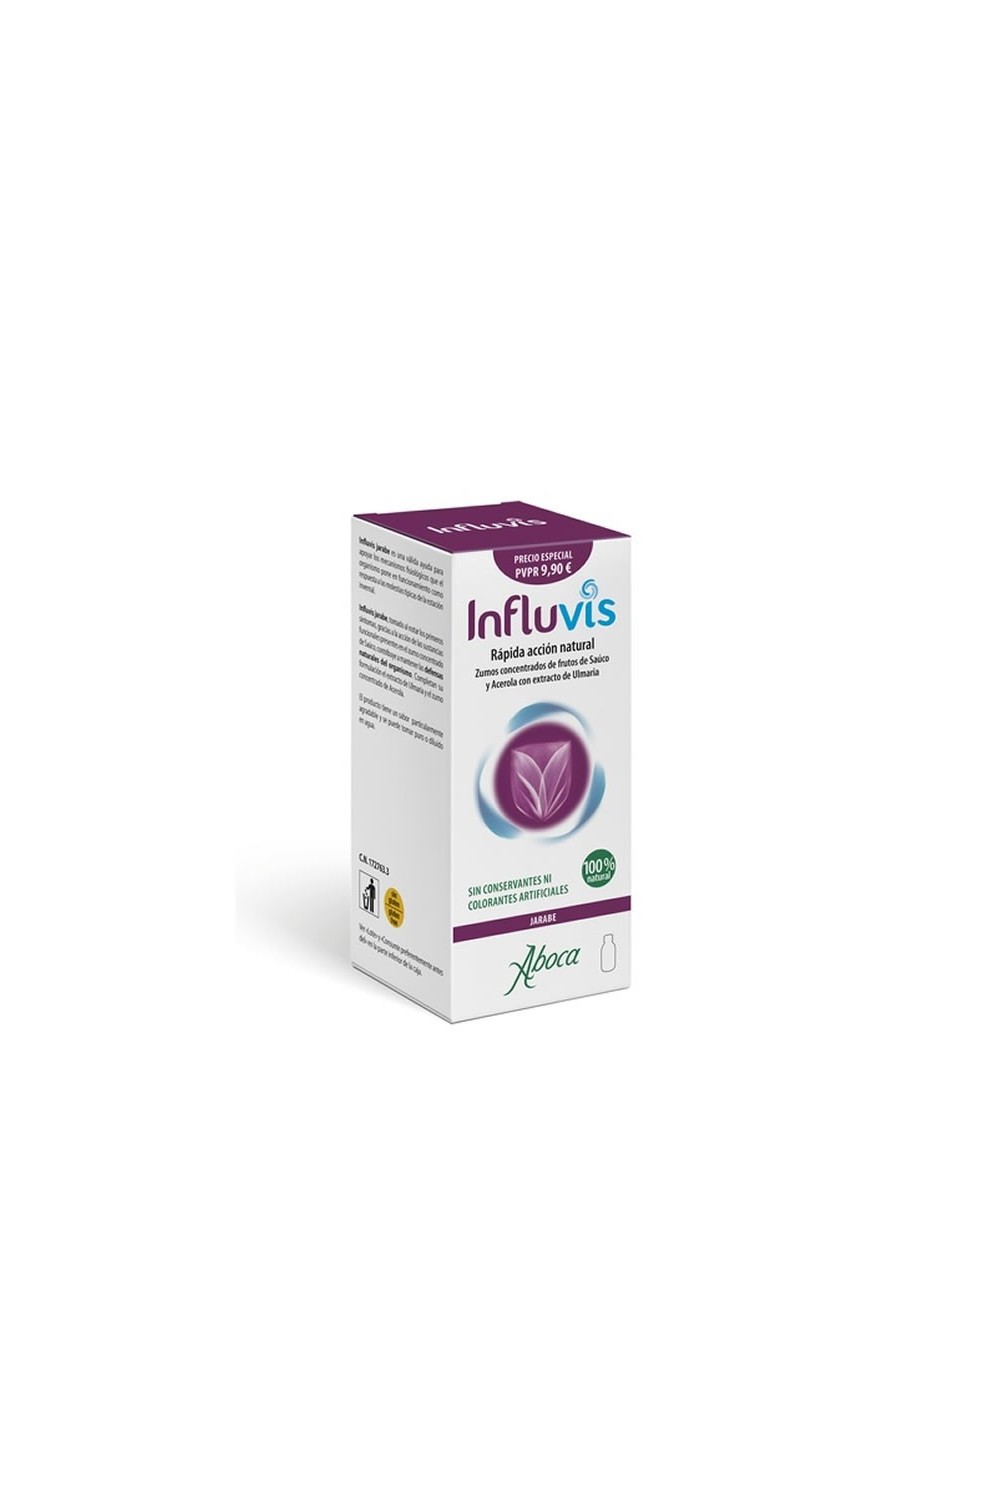 Aboca Influvis Syrup 120g